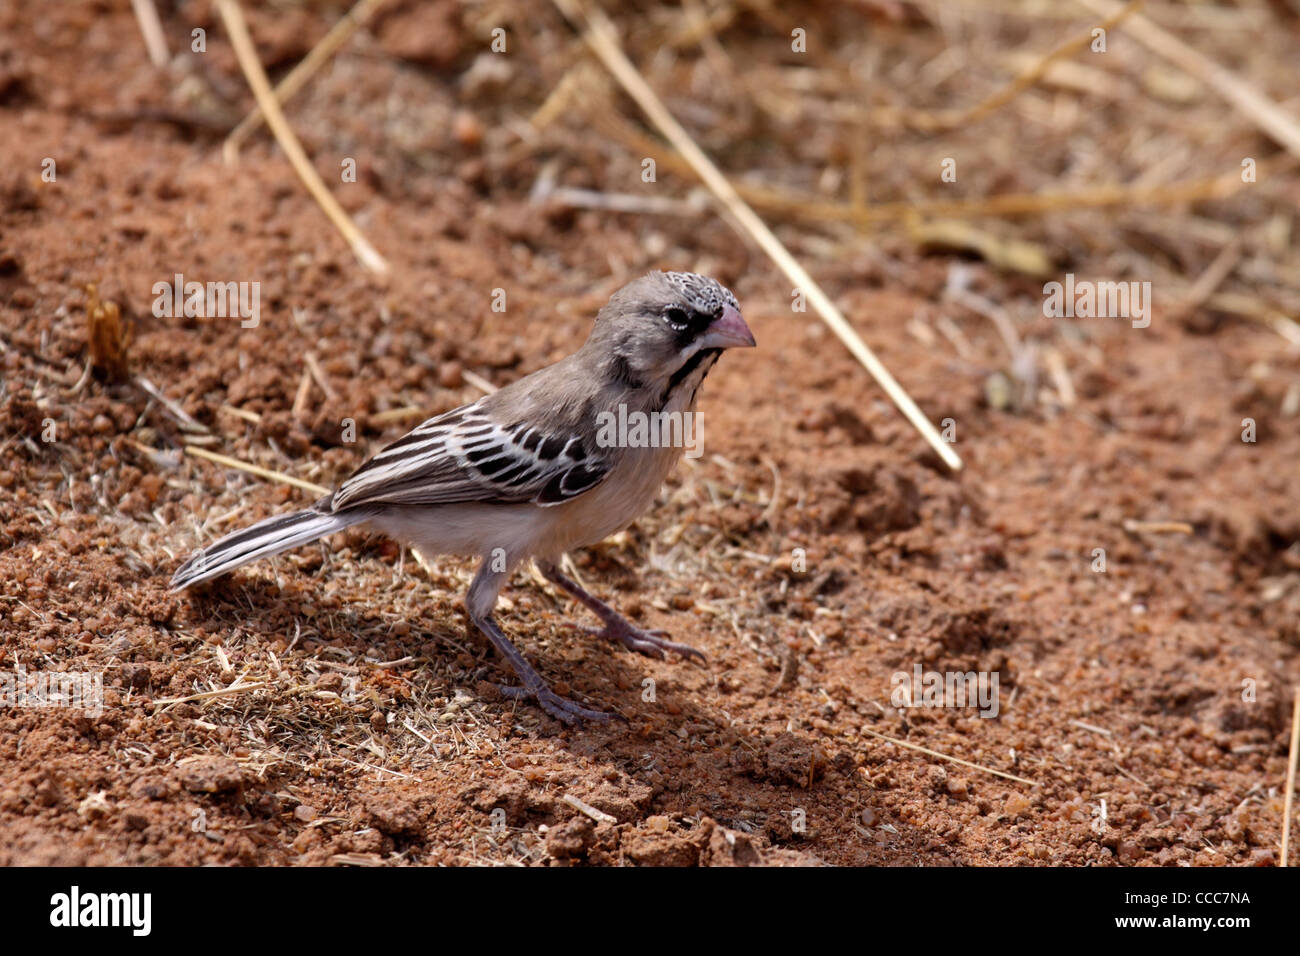 Scaly feathered finch in Namibia Stock Photo